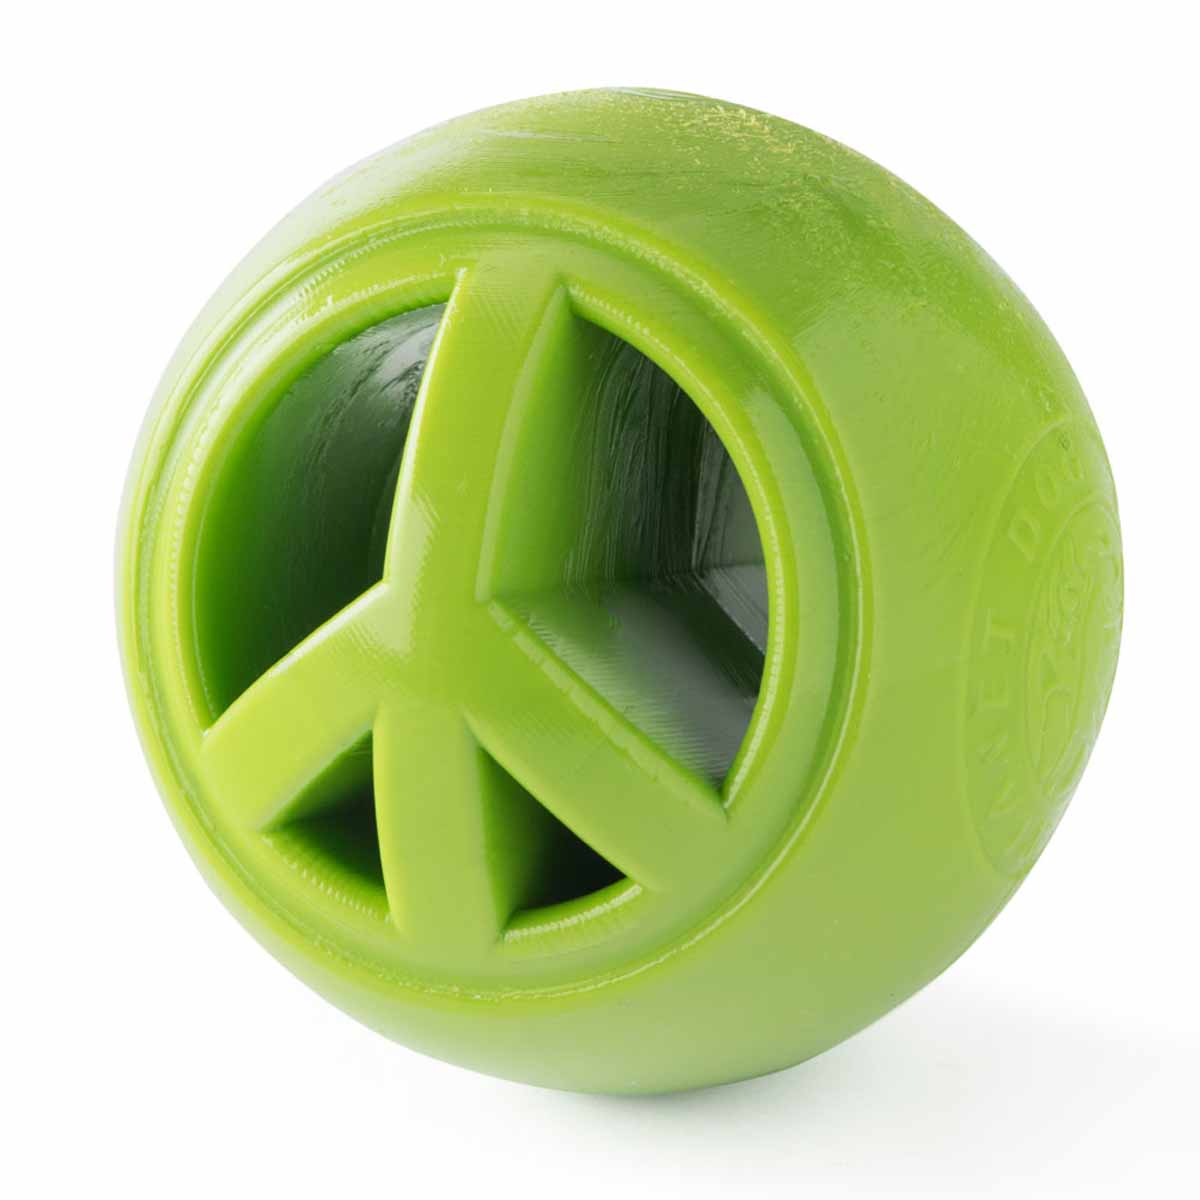 Planet Dog Orbee-Tuff Nooks Ball Dog Toy - Peace